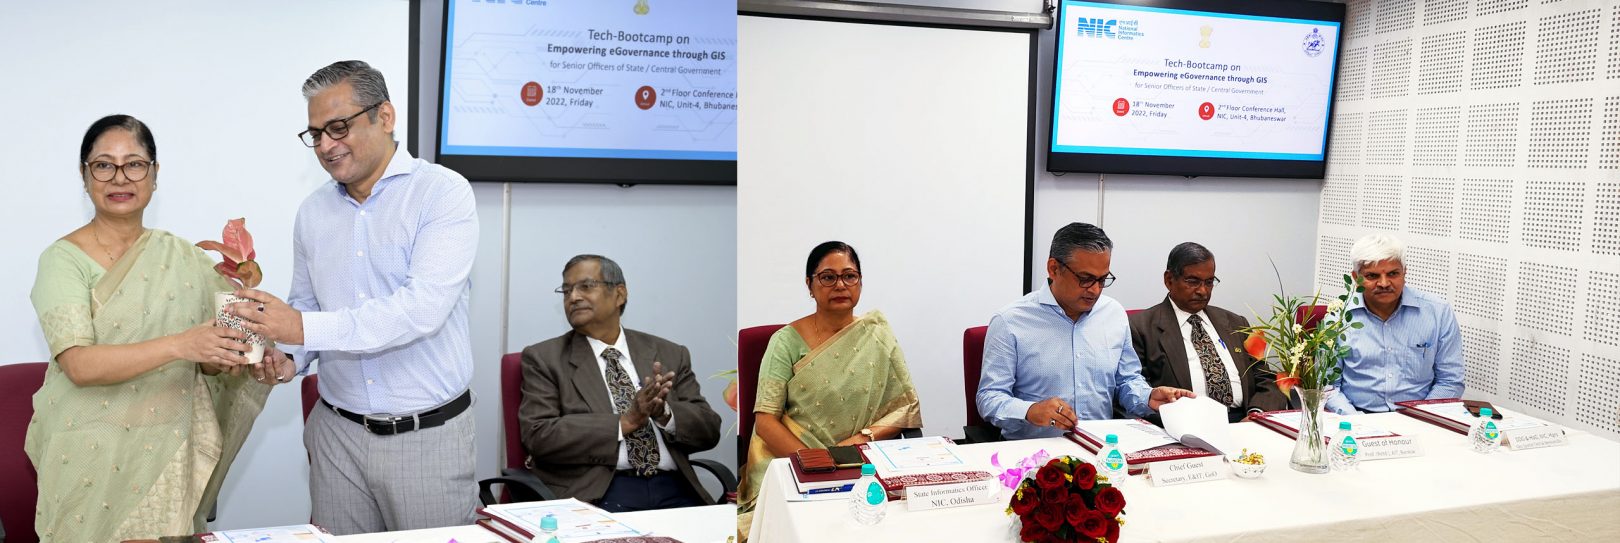 Secretary, Electronics and IT, Odisha inaugurated the Tech-Bootcamp on Empowering eGovernance through GIS.